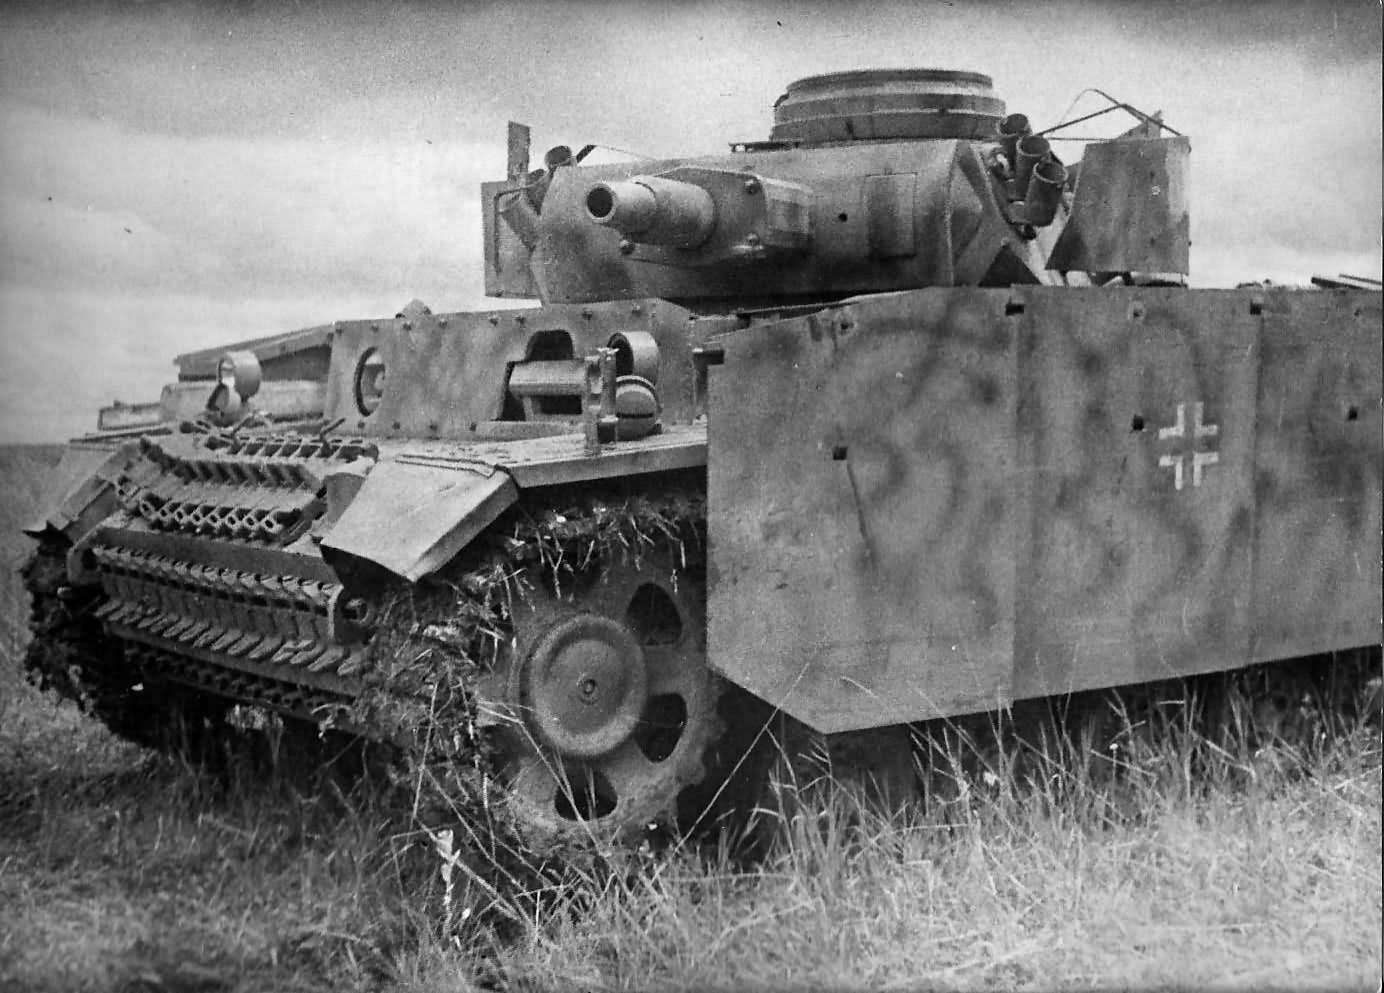 Panzerkampfwagen III Ausf N with short barrel main gun and extra side armour<a href="https://www.quora.com/What-was-the-role-of-the-Panzer-III-tank-in-World-War-II-Why-is-it-underappreciated-compared-to-other-tanks-like-the-Tiger-Panther-or-T-34" rel="nofollow"> Source</a>